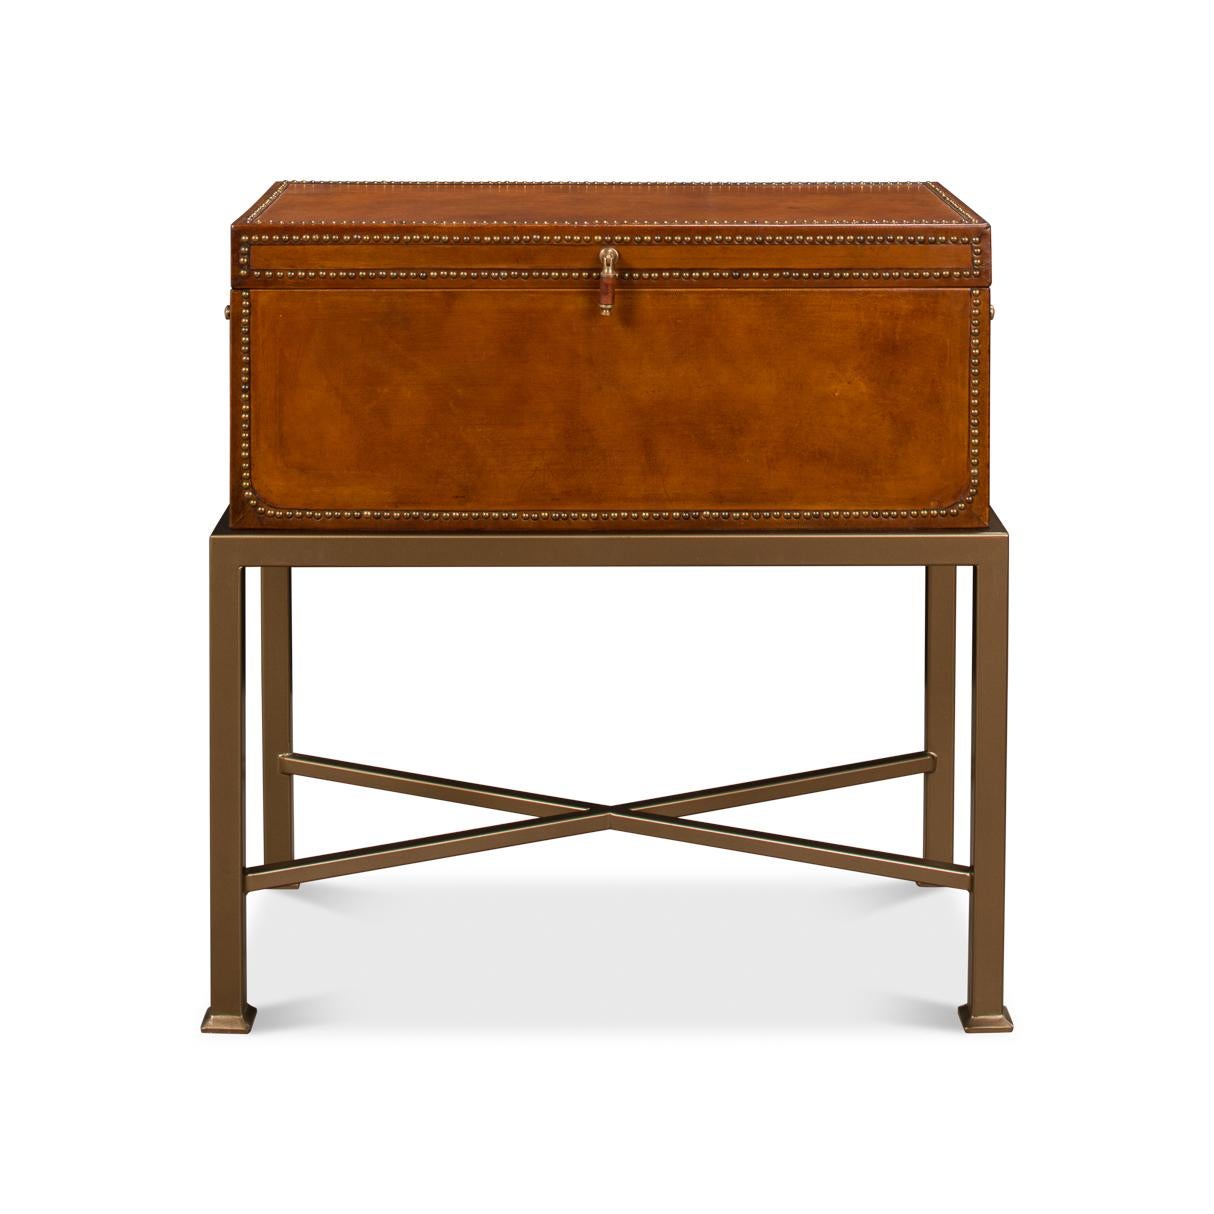 Adorned with brass trim, the leather box exudes an air of nobility and luxury. The brass accents catch the light and draw the eye, adding an extra layer of allure to the piece. The stand, with its clean lines and sturdy construction, provides the